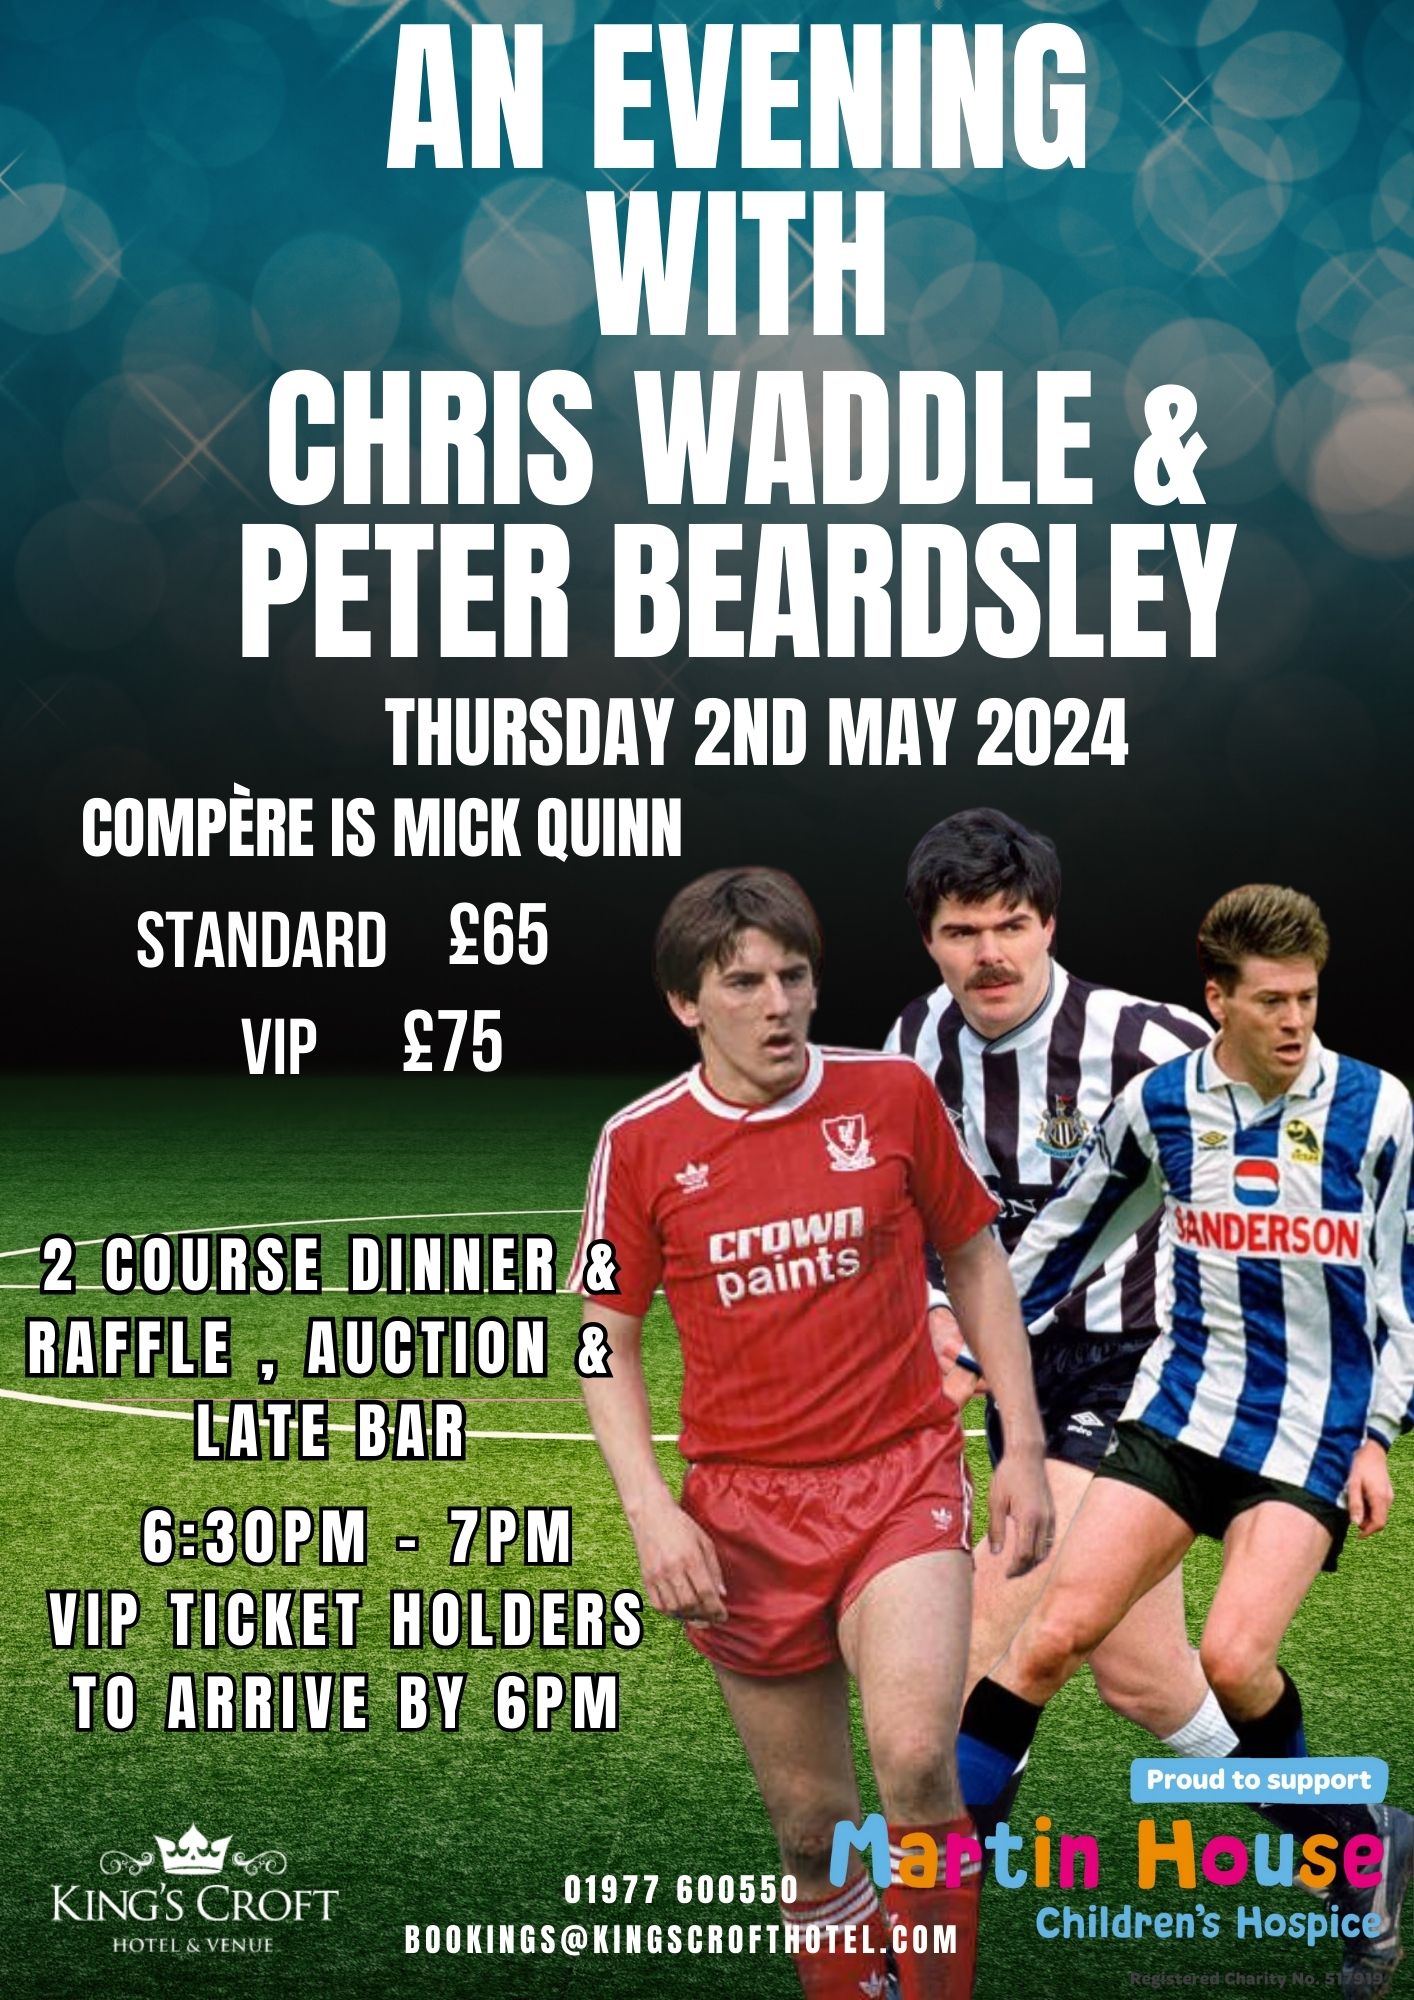 An Evening with Chris Waddle & Peter Beardsley VIP